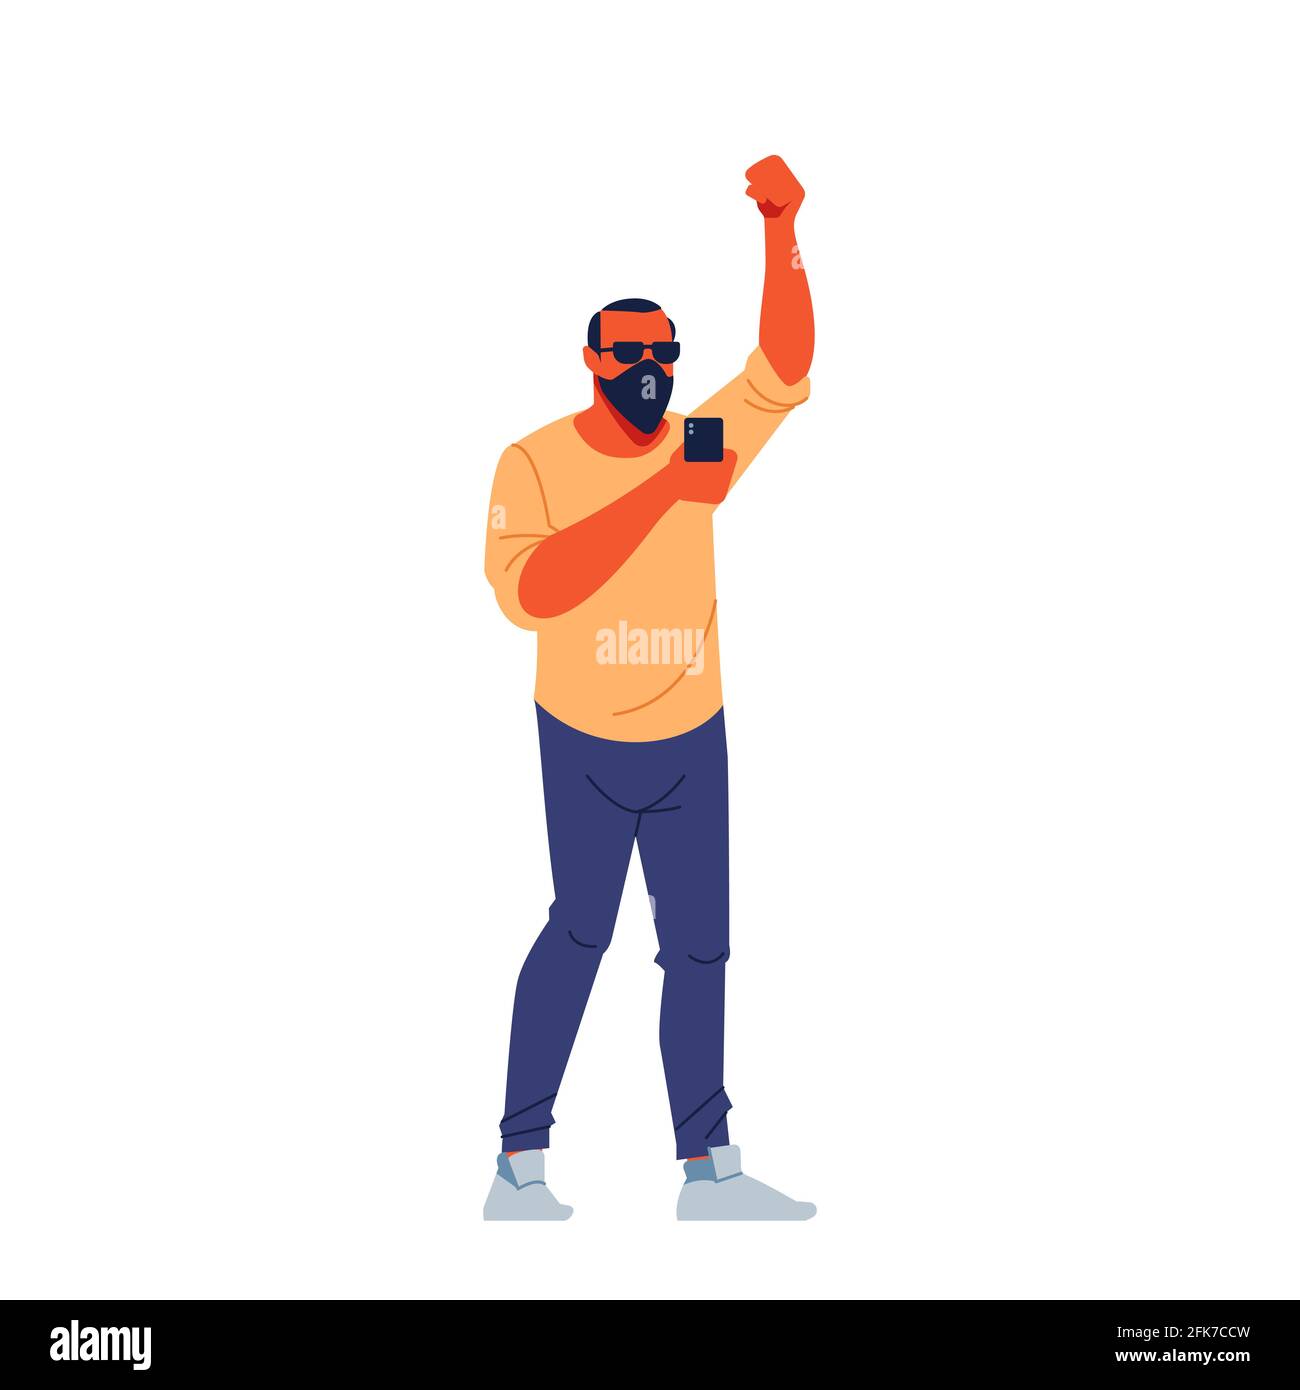 Protesting man with black mask, sunglasses and phone marching In protest, screaming angry, protesting and demanding political freedoms. Flat character Stock Vector